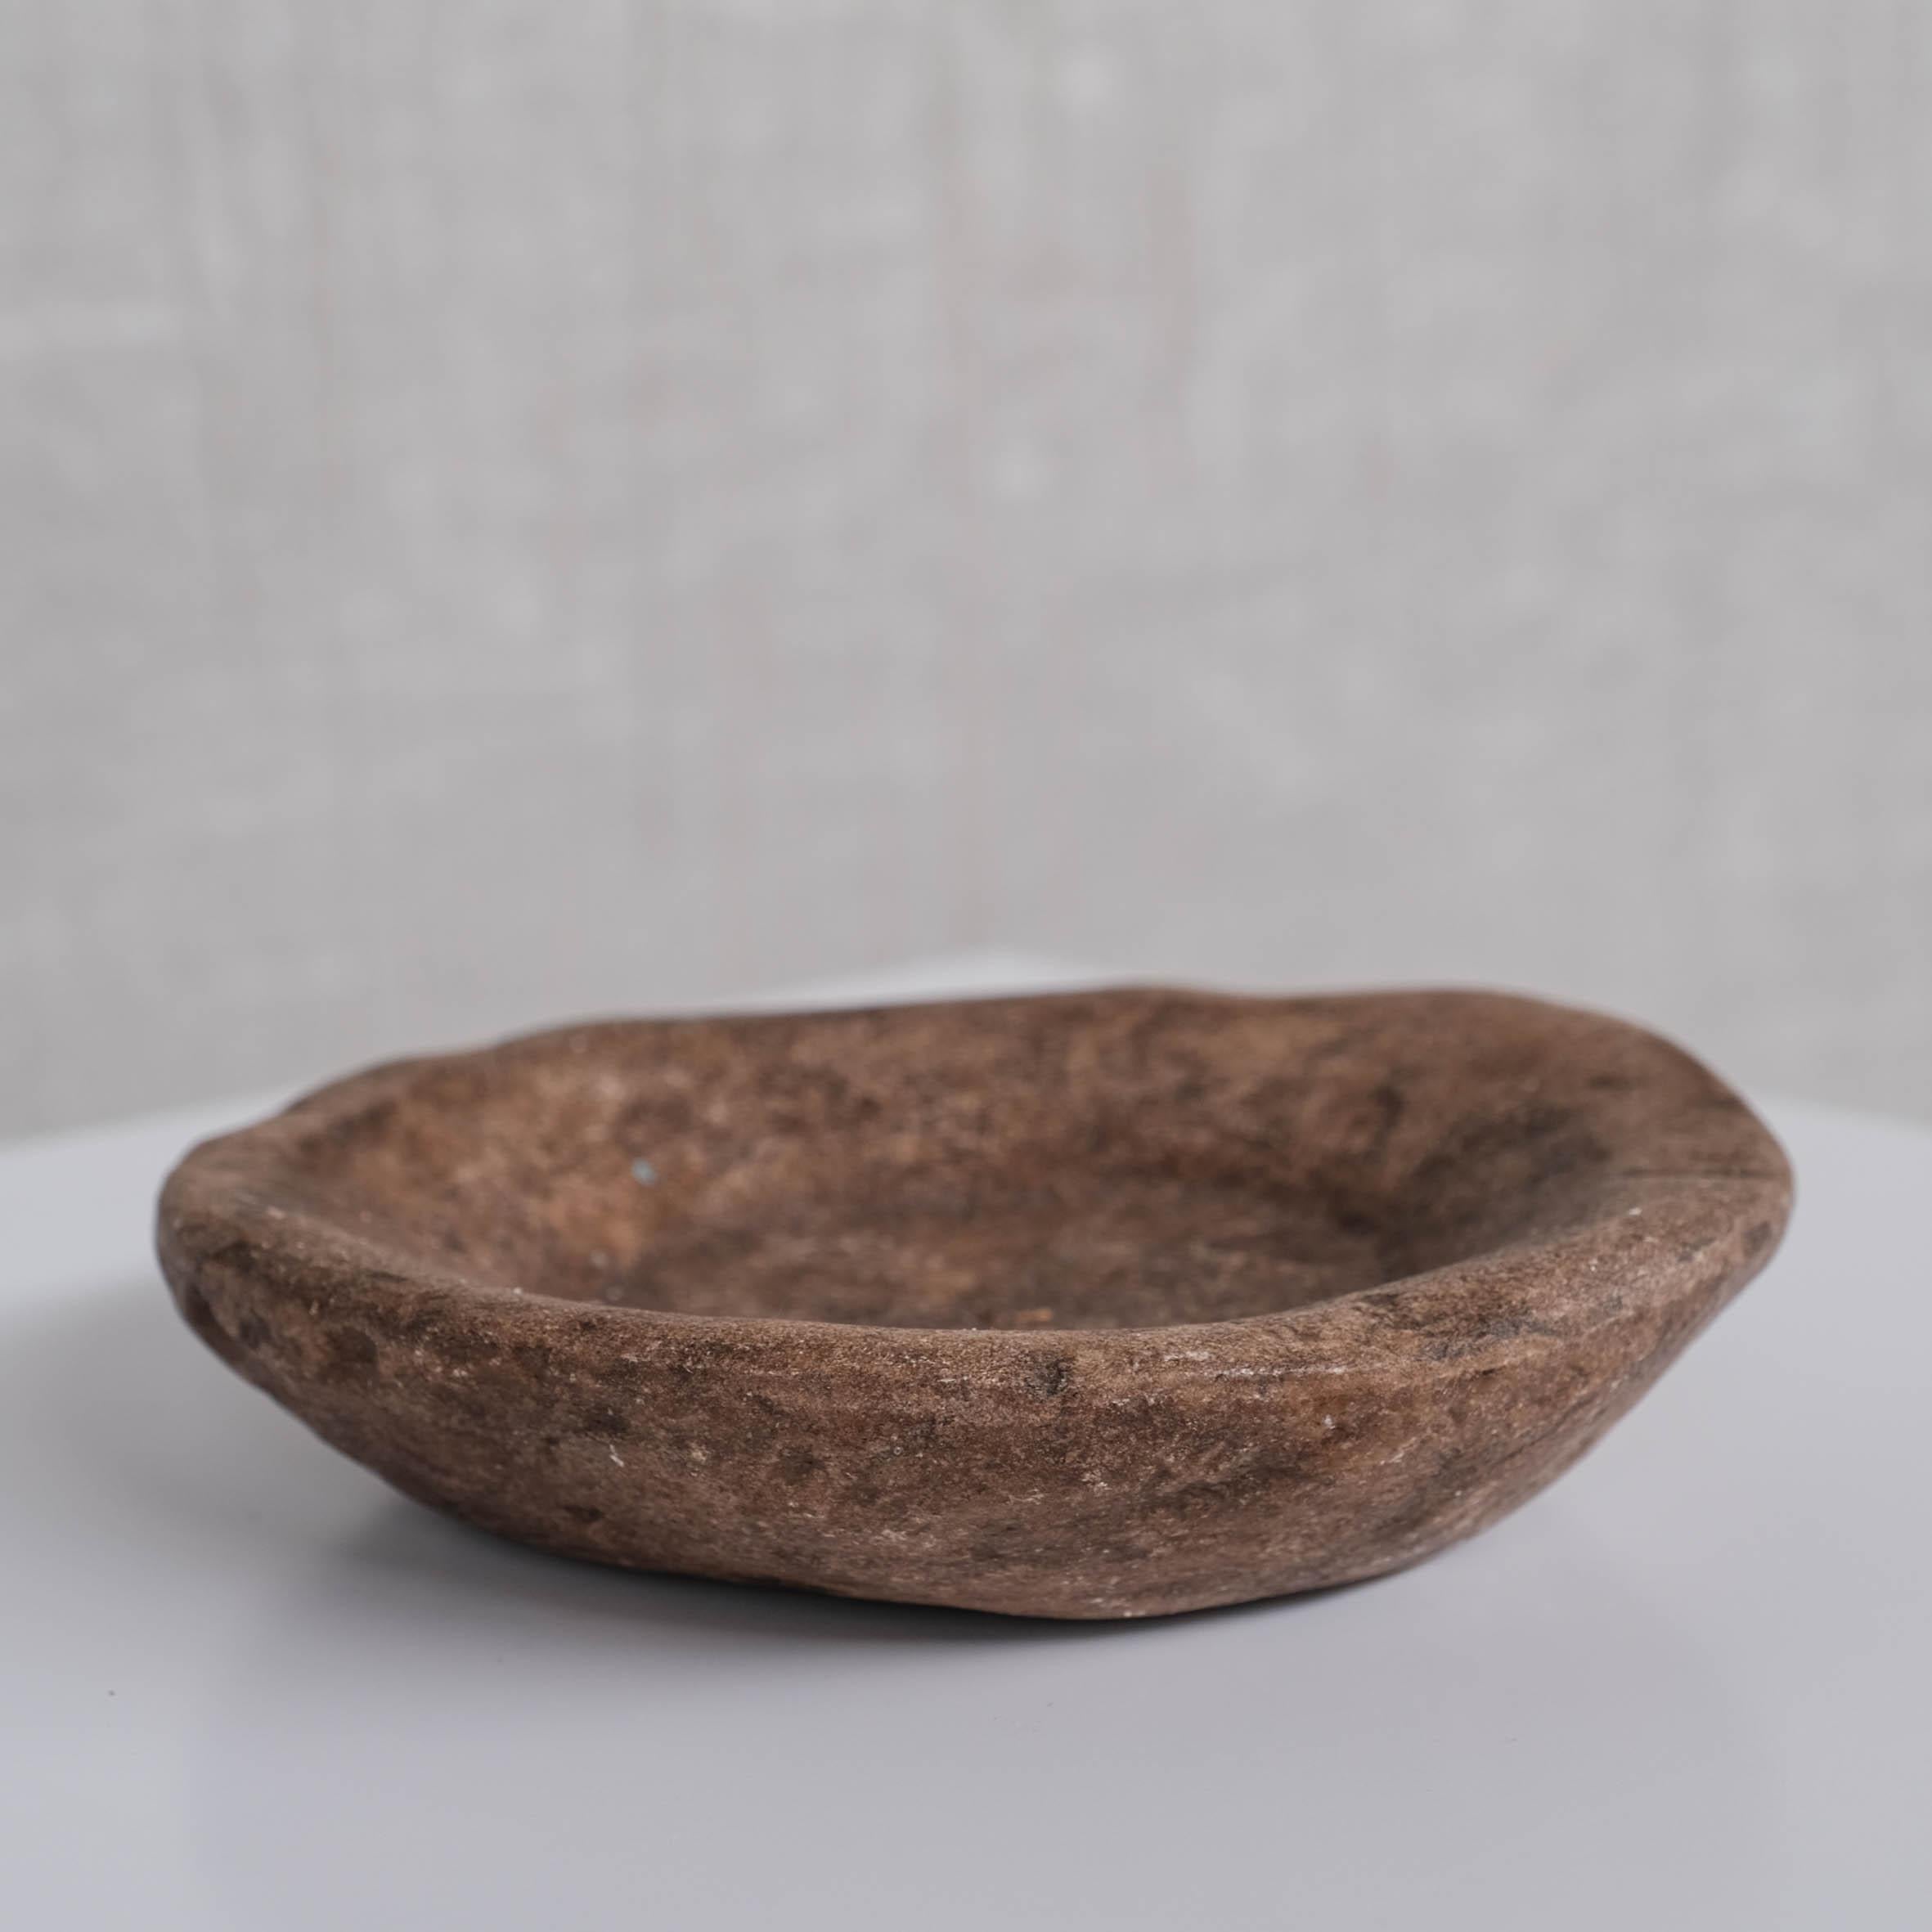 A primitive style marble or stone bowl or platter. 

Small size. 

Nepal, c1920s. 

Good condition. 

Ideal for a wabi-sabi style. Very tactile. 

Location: Belgium Gallery. 

Dimensions: 4 Height x 19 Diameter in cm. 

Delivery: